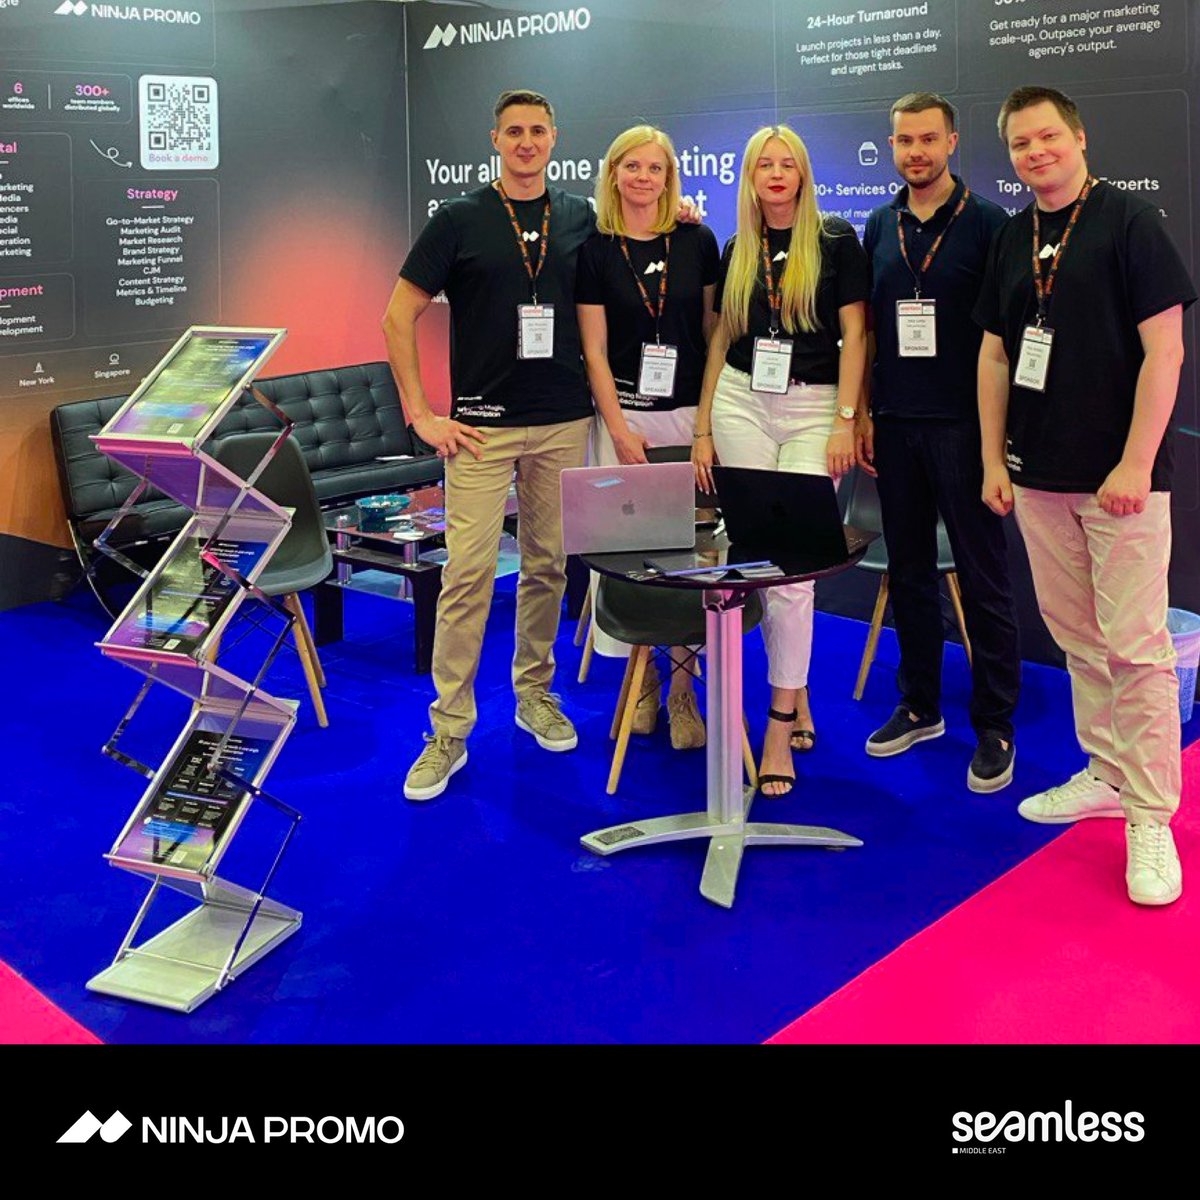 💡 Let’s connect at @SEAMLESSMENA 2024!

📅 14 - 16 May 2024
📍 Dubai World Trade Centre, Dubai

🔥 Our team is waiting for you at booth H3-C36. 🔥

Looking forward to discussing innovative marketing solutions with you! 👀

#ninjapromo #digitalagency #marketingagency